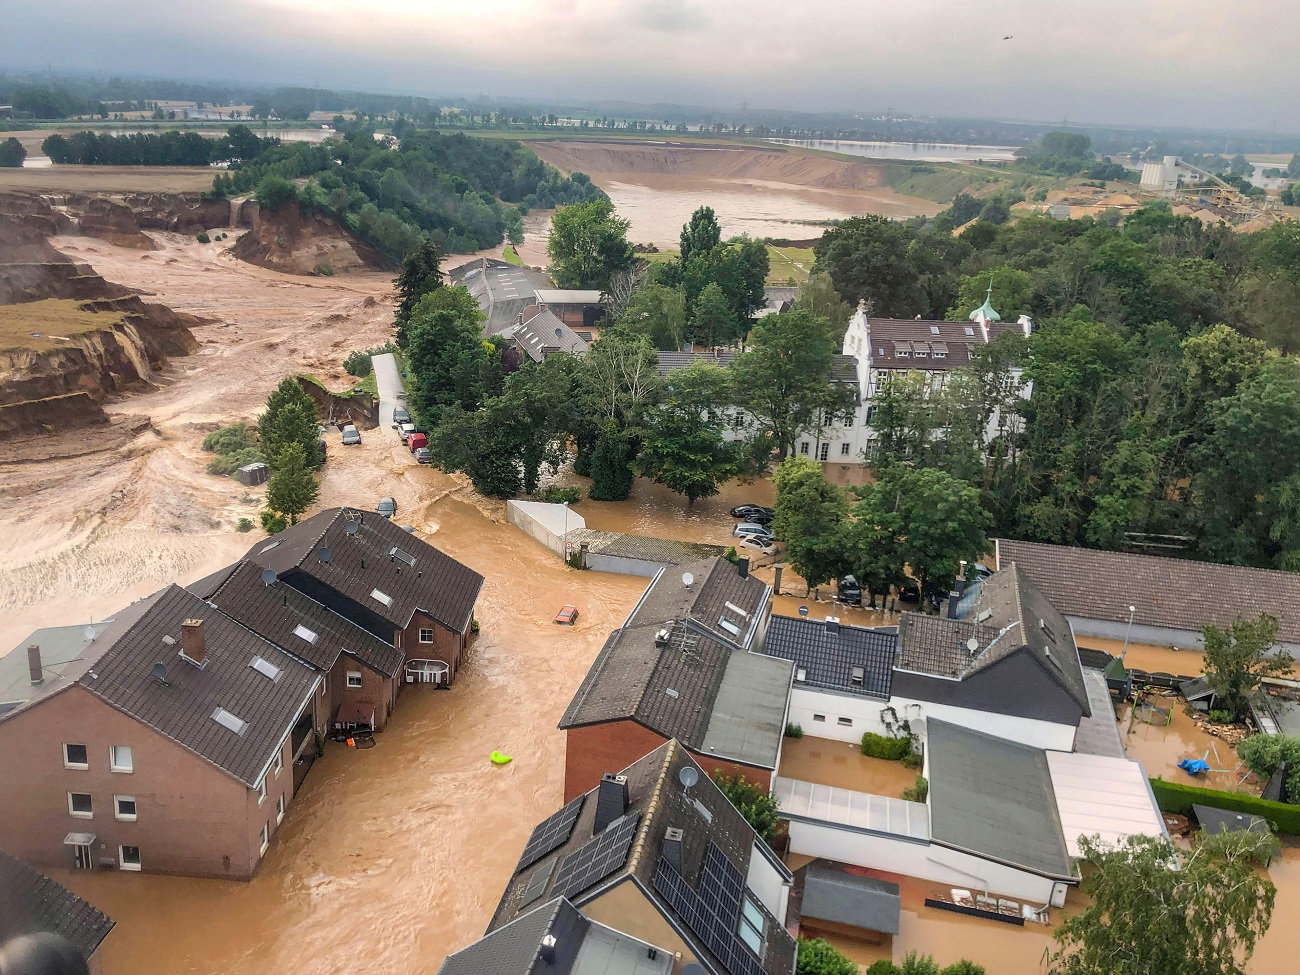 An areal view after flooding at Erftstadt-Blessem, Germany, July 16, 2021.  REUTERS/Rhein-Erft-Kreis   NO RESALES. NO ARCHIVES